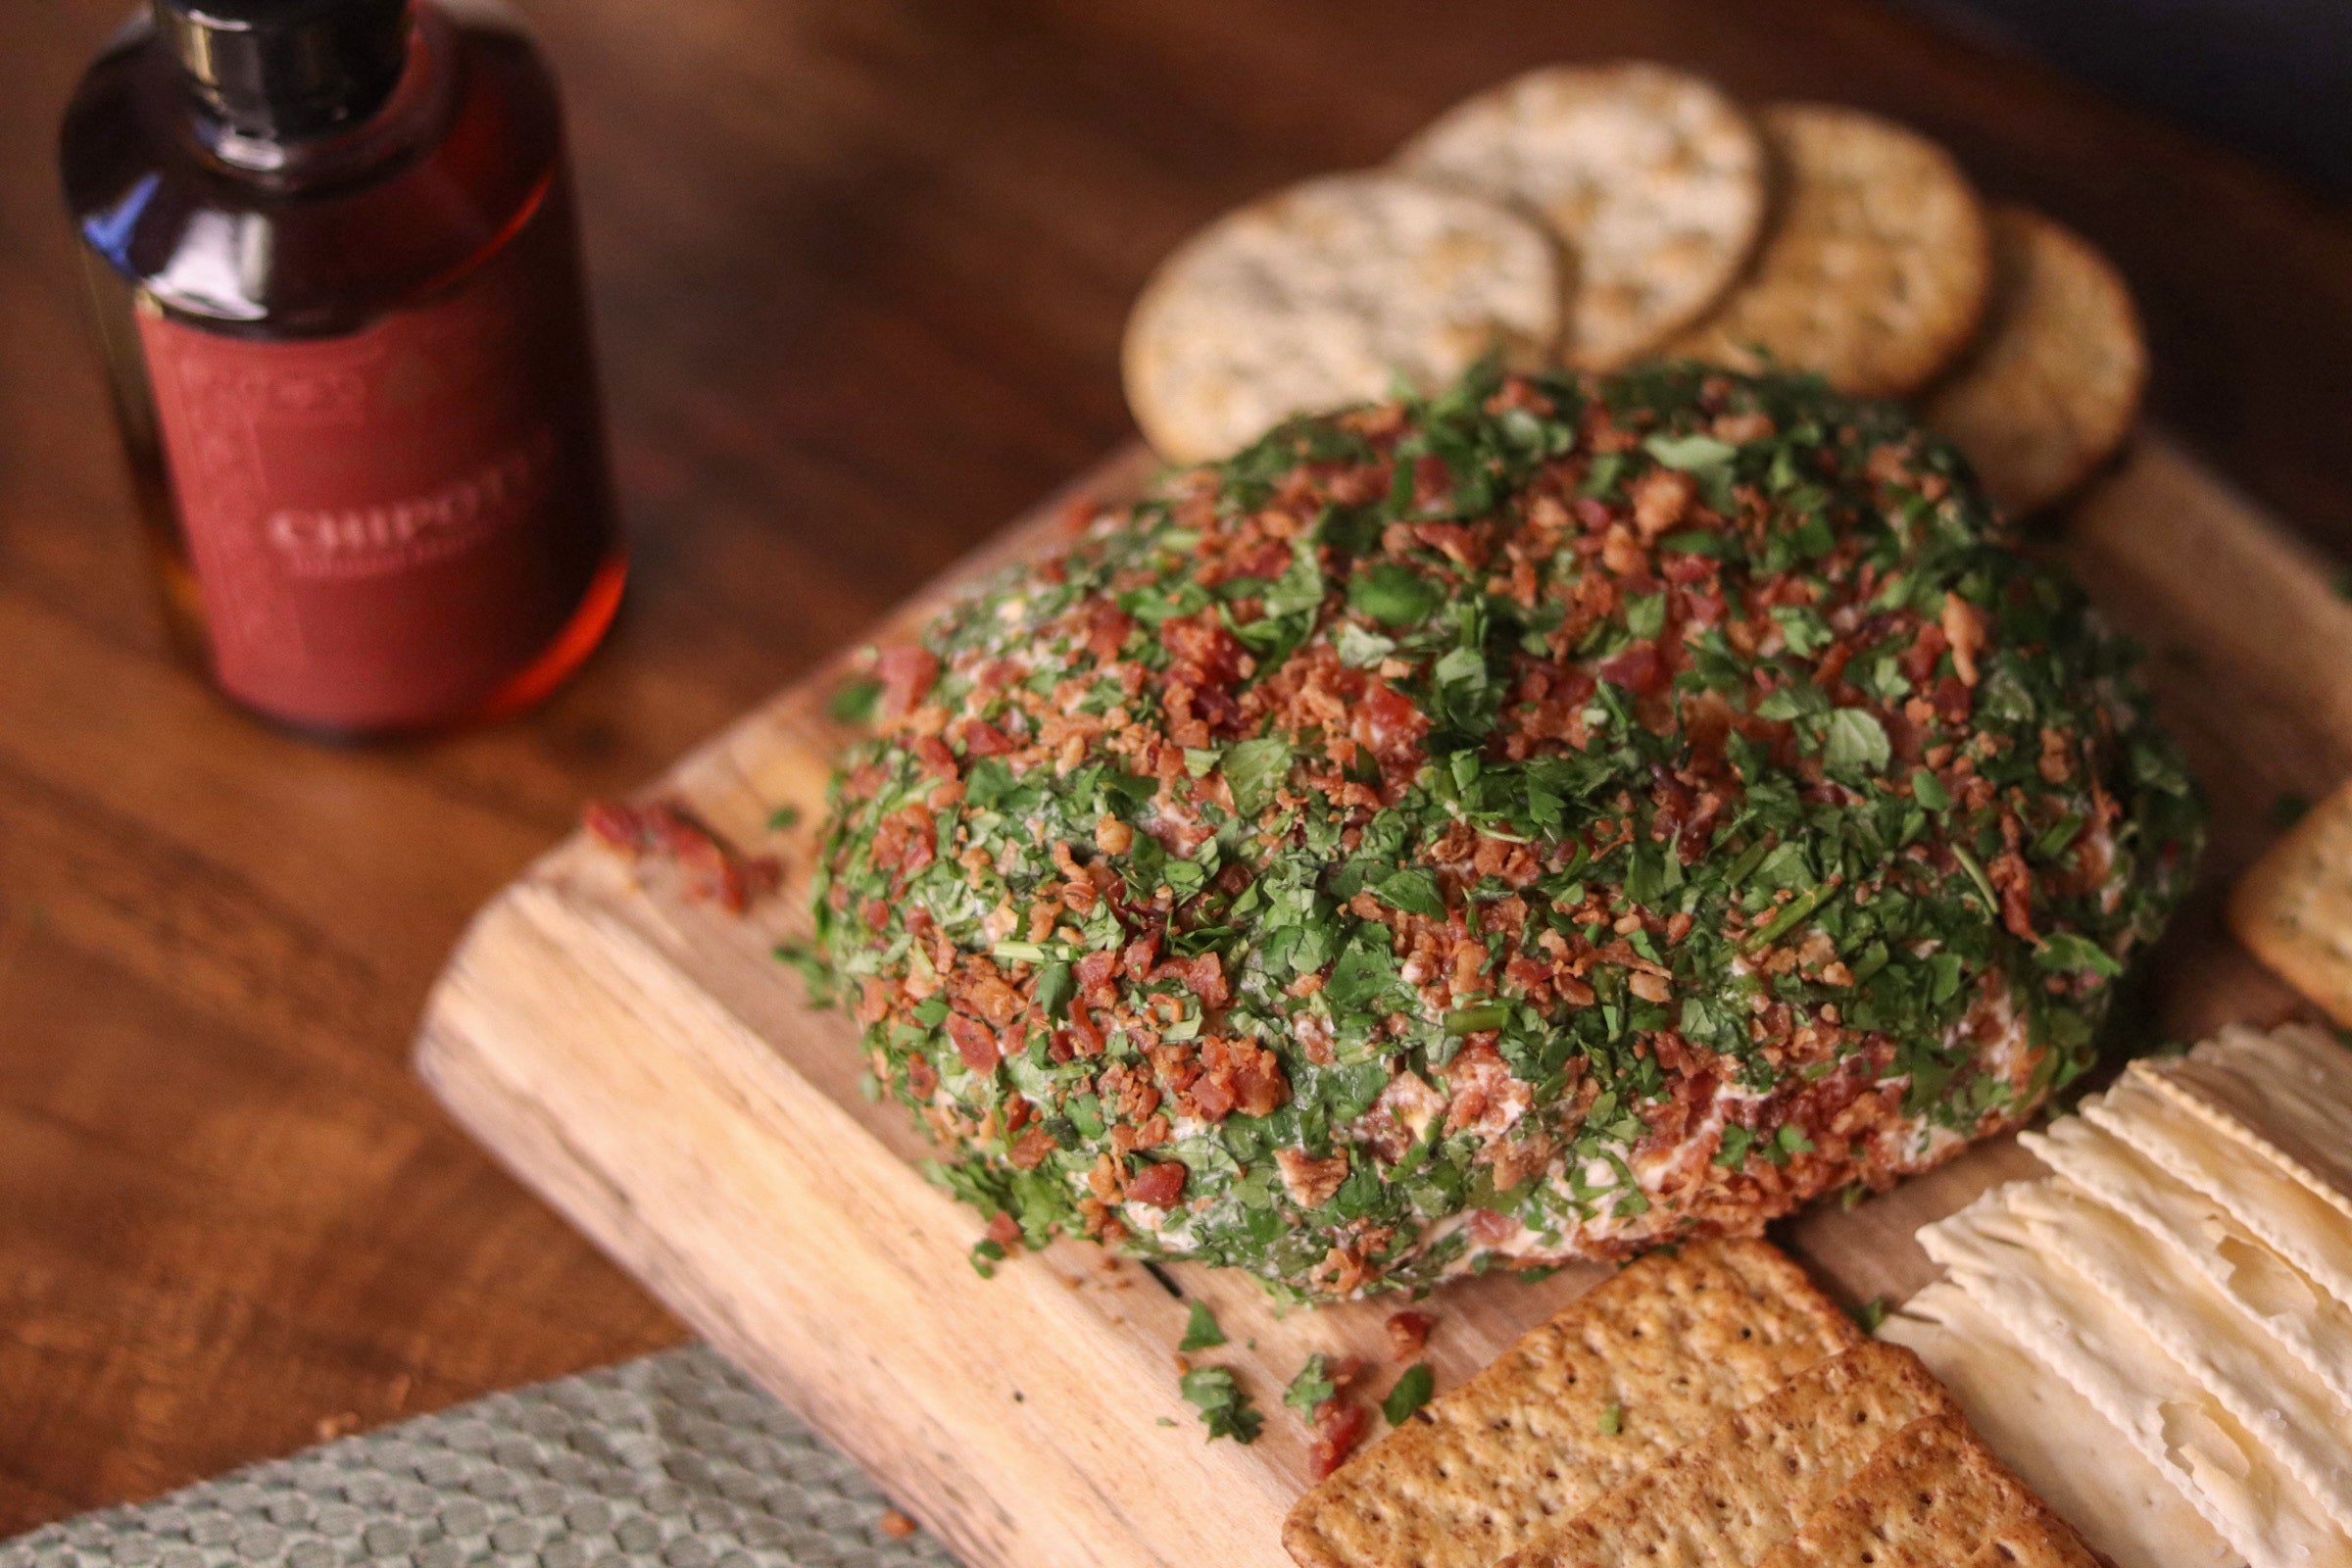 Cheeseball using Chipotle Infused Maple Syrup. A perfect Holiday appetizer